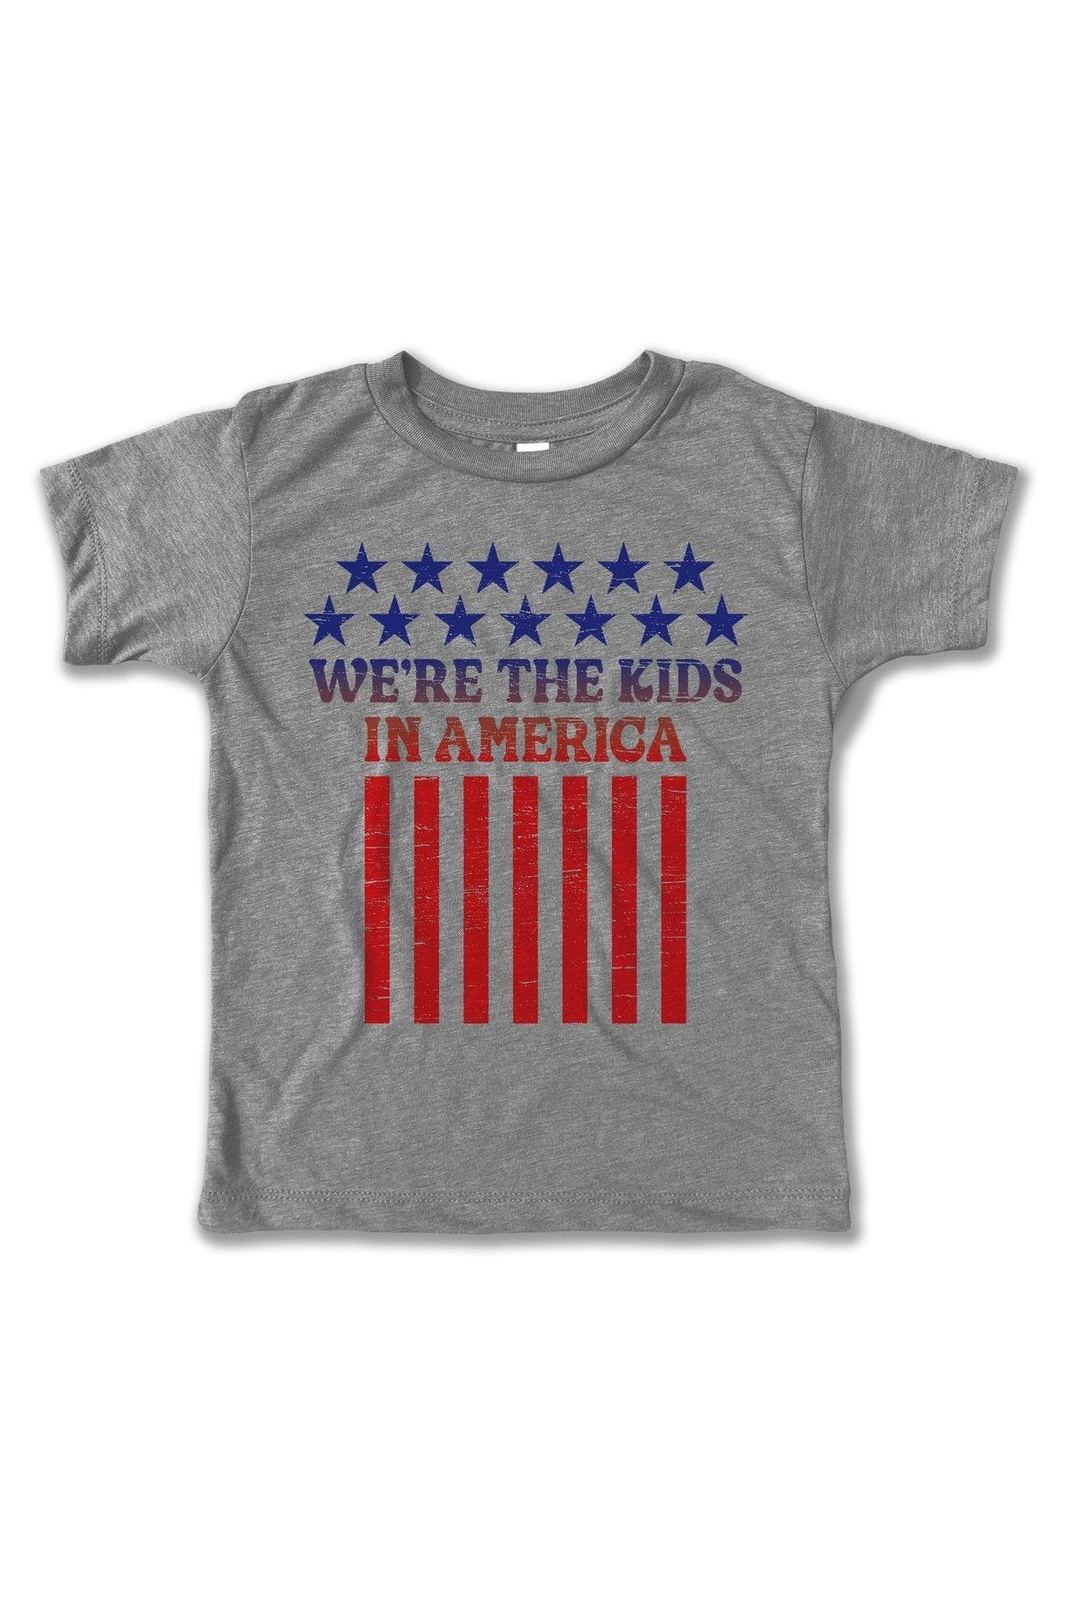 Kids In America Tee - Tea for Three: A Children's Boutique-New Arrivals-TheT43Shop